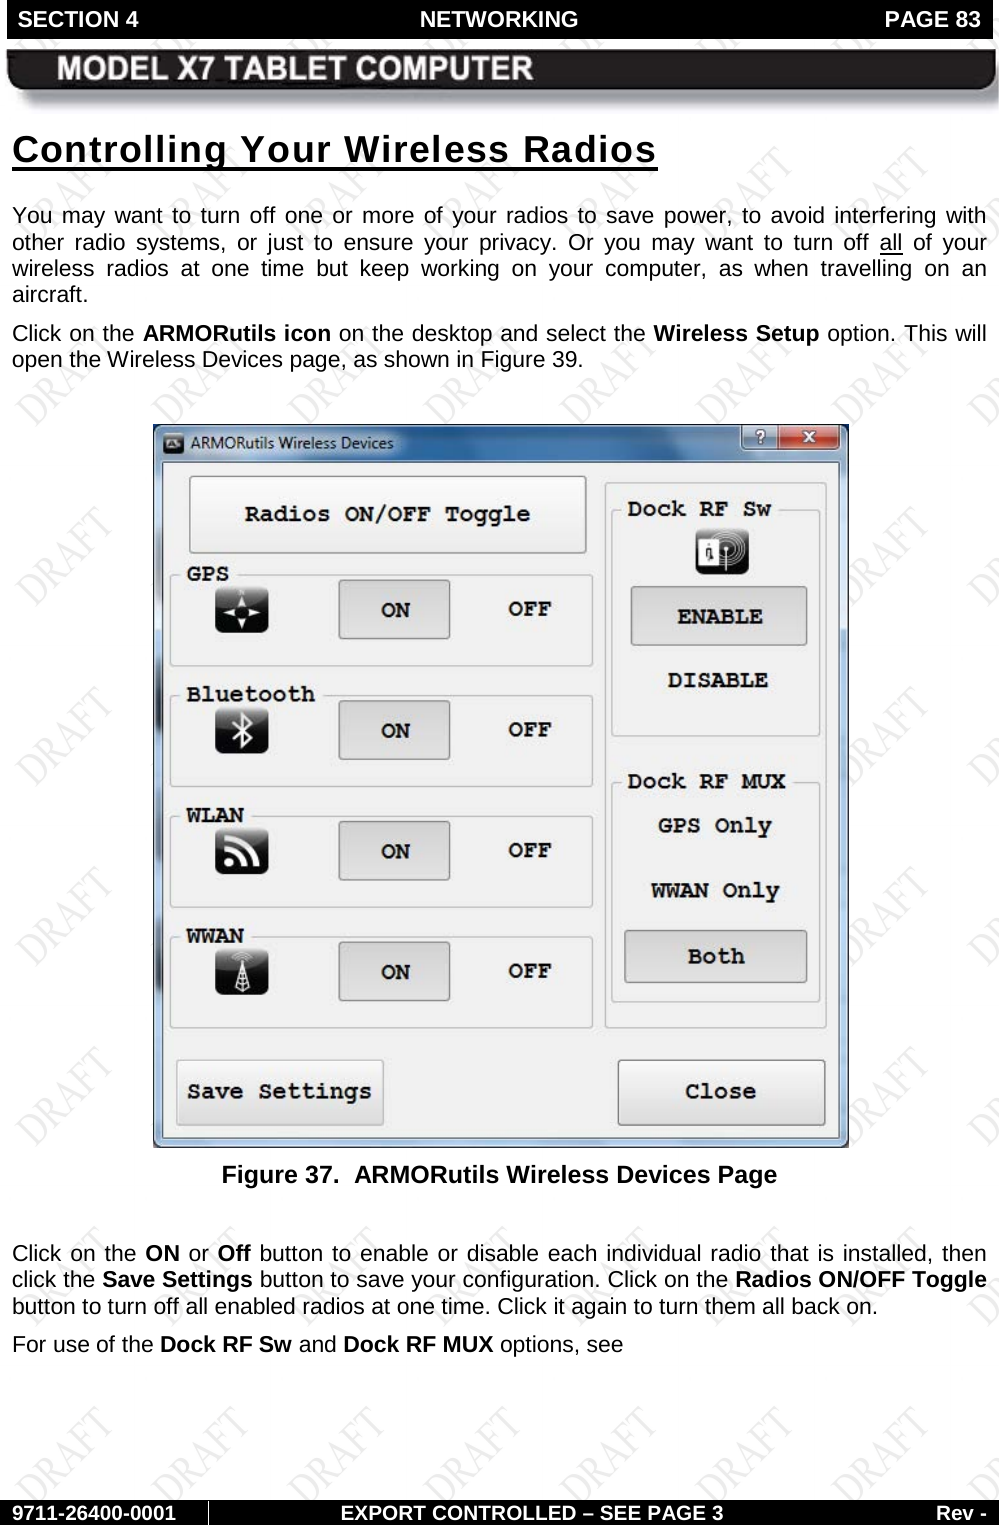 SECTION 4 NETWORKING  PAGE 83        9711-26400-0001 EXPORT CONTROLLED – SEE PAGE 3 Rev - Controlling Your Wireless Radios You may want to turn off one or more of your radios to save power, to avoid interfering with other radio systems, or just to ensure your privacy. Or you may want to turn off all of your wireless radios at one time but keep working on your computer, as when travelling on an aircraft. Click on the ARMORutils icon on the desktop and select the Wireless Setup option. This will open the Wireless Devices page, as shown in Figure 39.   Figure 37.  ARMORutils Wireless Devices Page  Click on the ON or Off button to enable or disable each individual radio that is installed, then click the Save Settings button to save your configuration. Click on the Radios ON/OFF Toggle button to turn off all enabled radios at one time. Click it again to turn them all back on. For use of the Dock RF Sw and Dock RF MUX options, see  